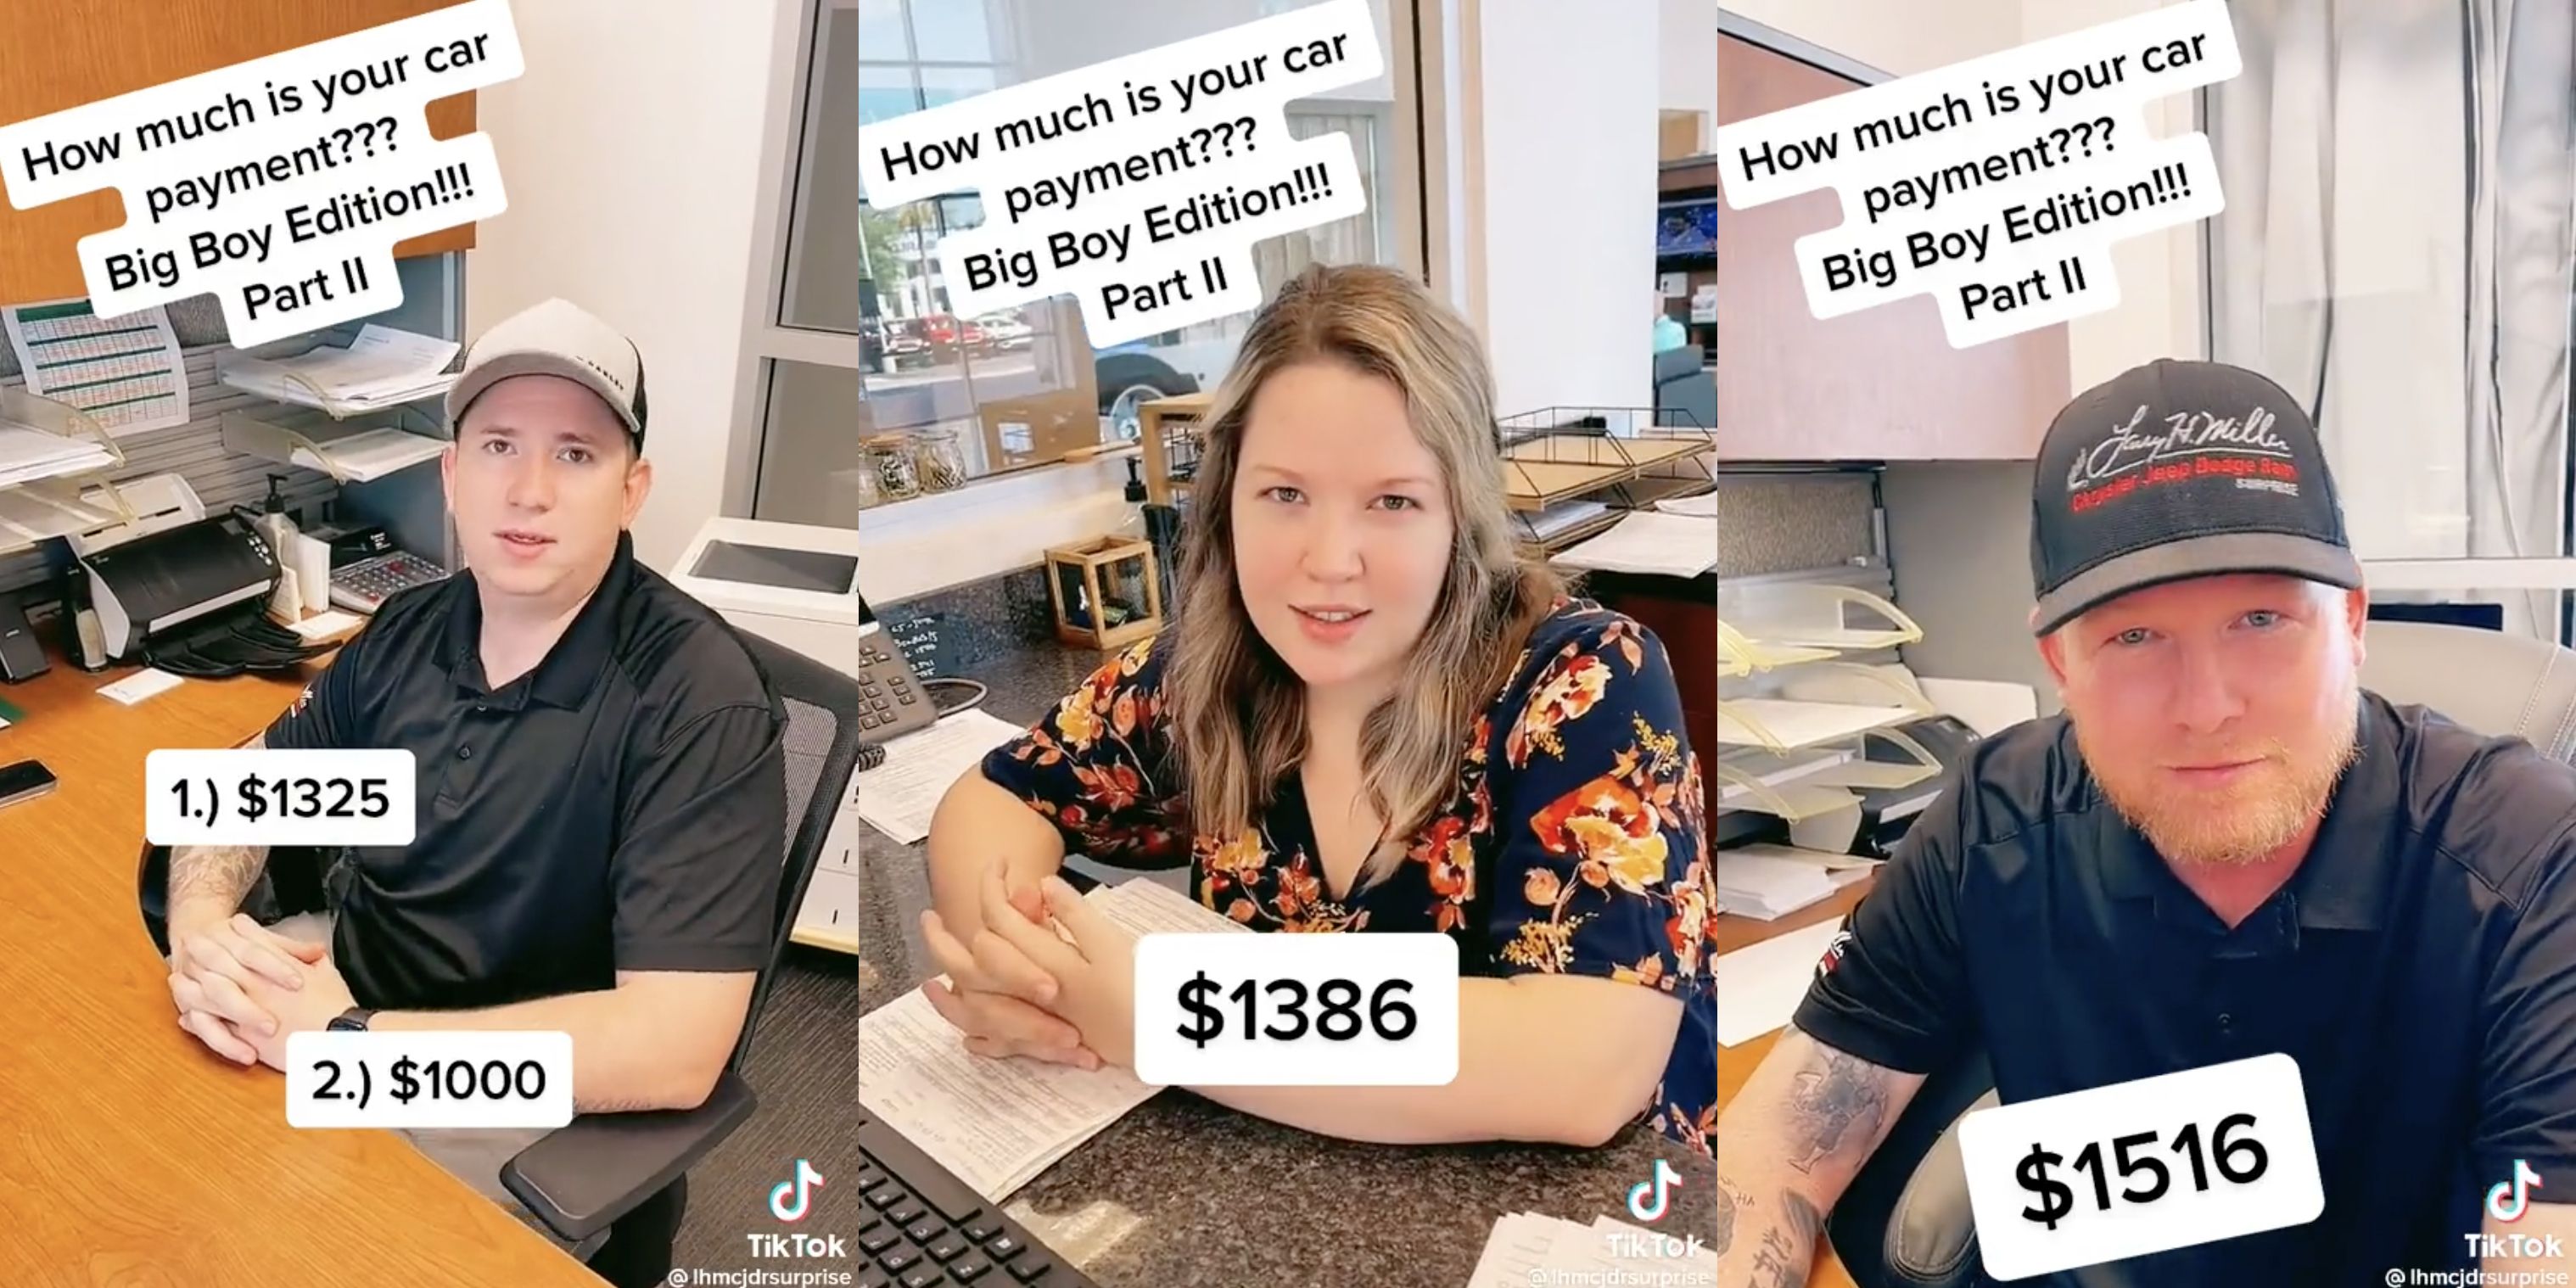 Viral Dealership Video Shows Monthly Car Payments Are Out of Control